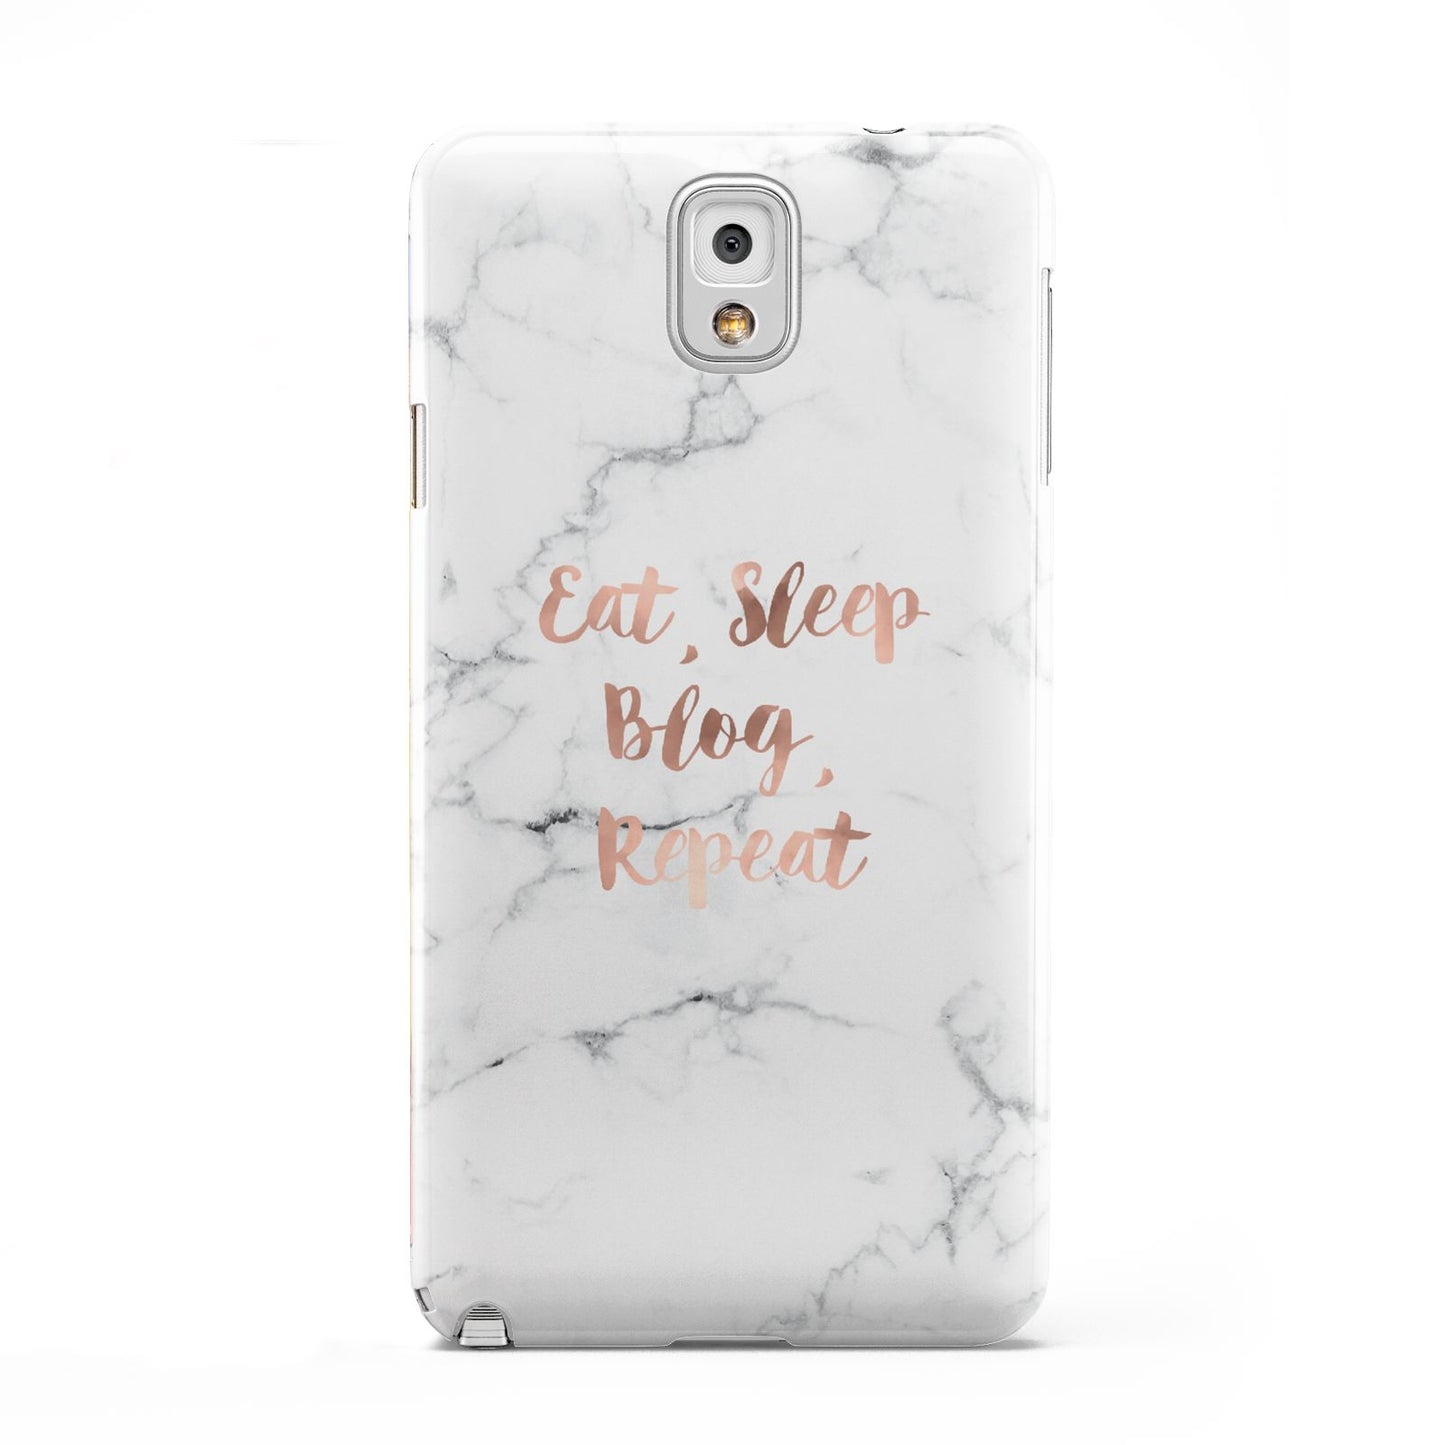 Eat Sleep Blog Repeat Marble Effect Samsung Galaxy Note 3 Case